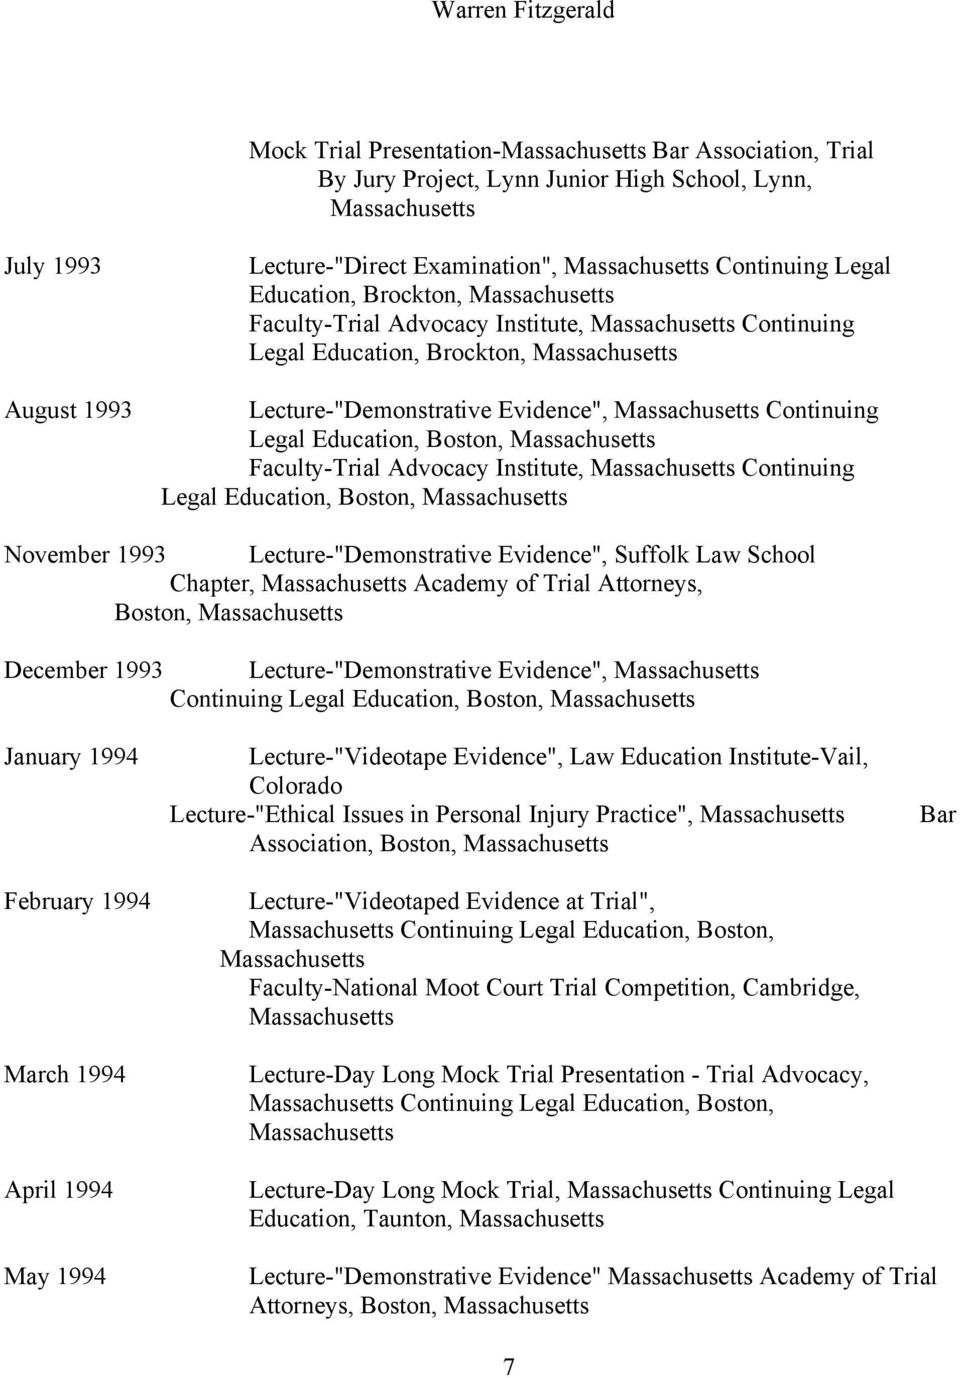 Suffolk Law School Chapter, Academy of Trial Attorneys, December 1993 Lecture-"Demonstrative Evidence", Continuing January 1994 February 1994 March 1994 April 1994 Lecture-"Videotape Evidence", Law